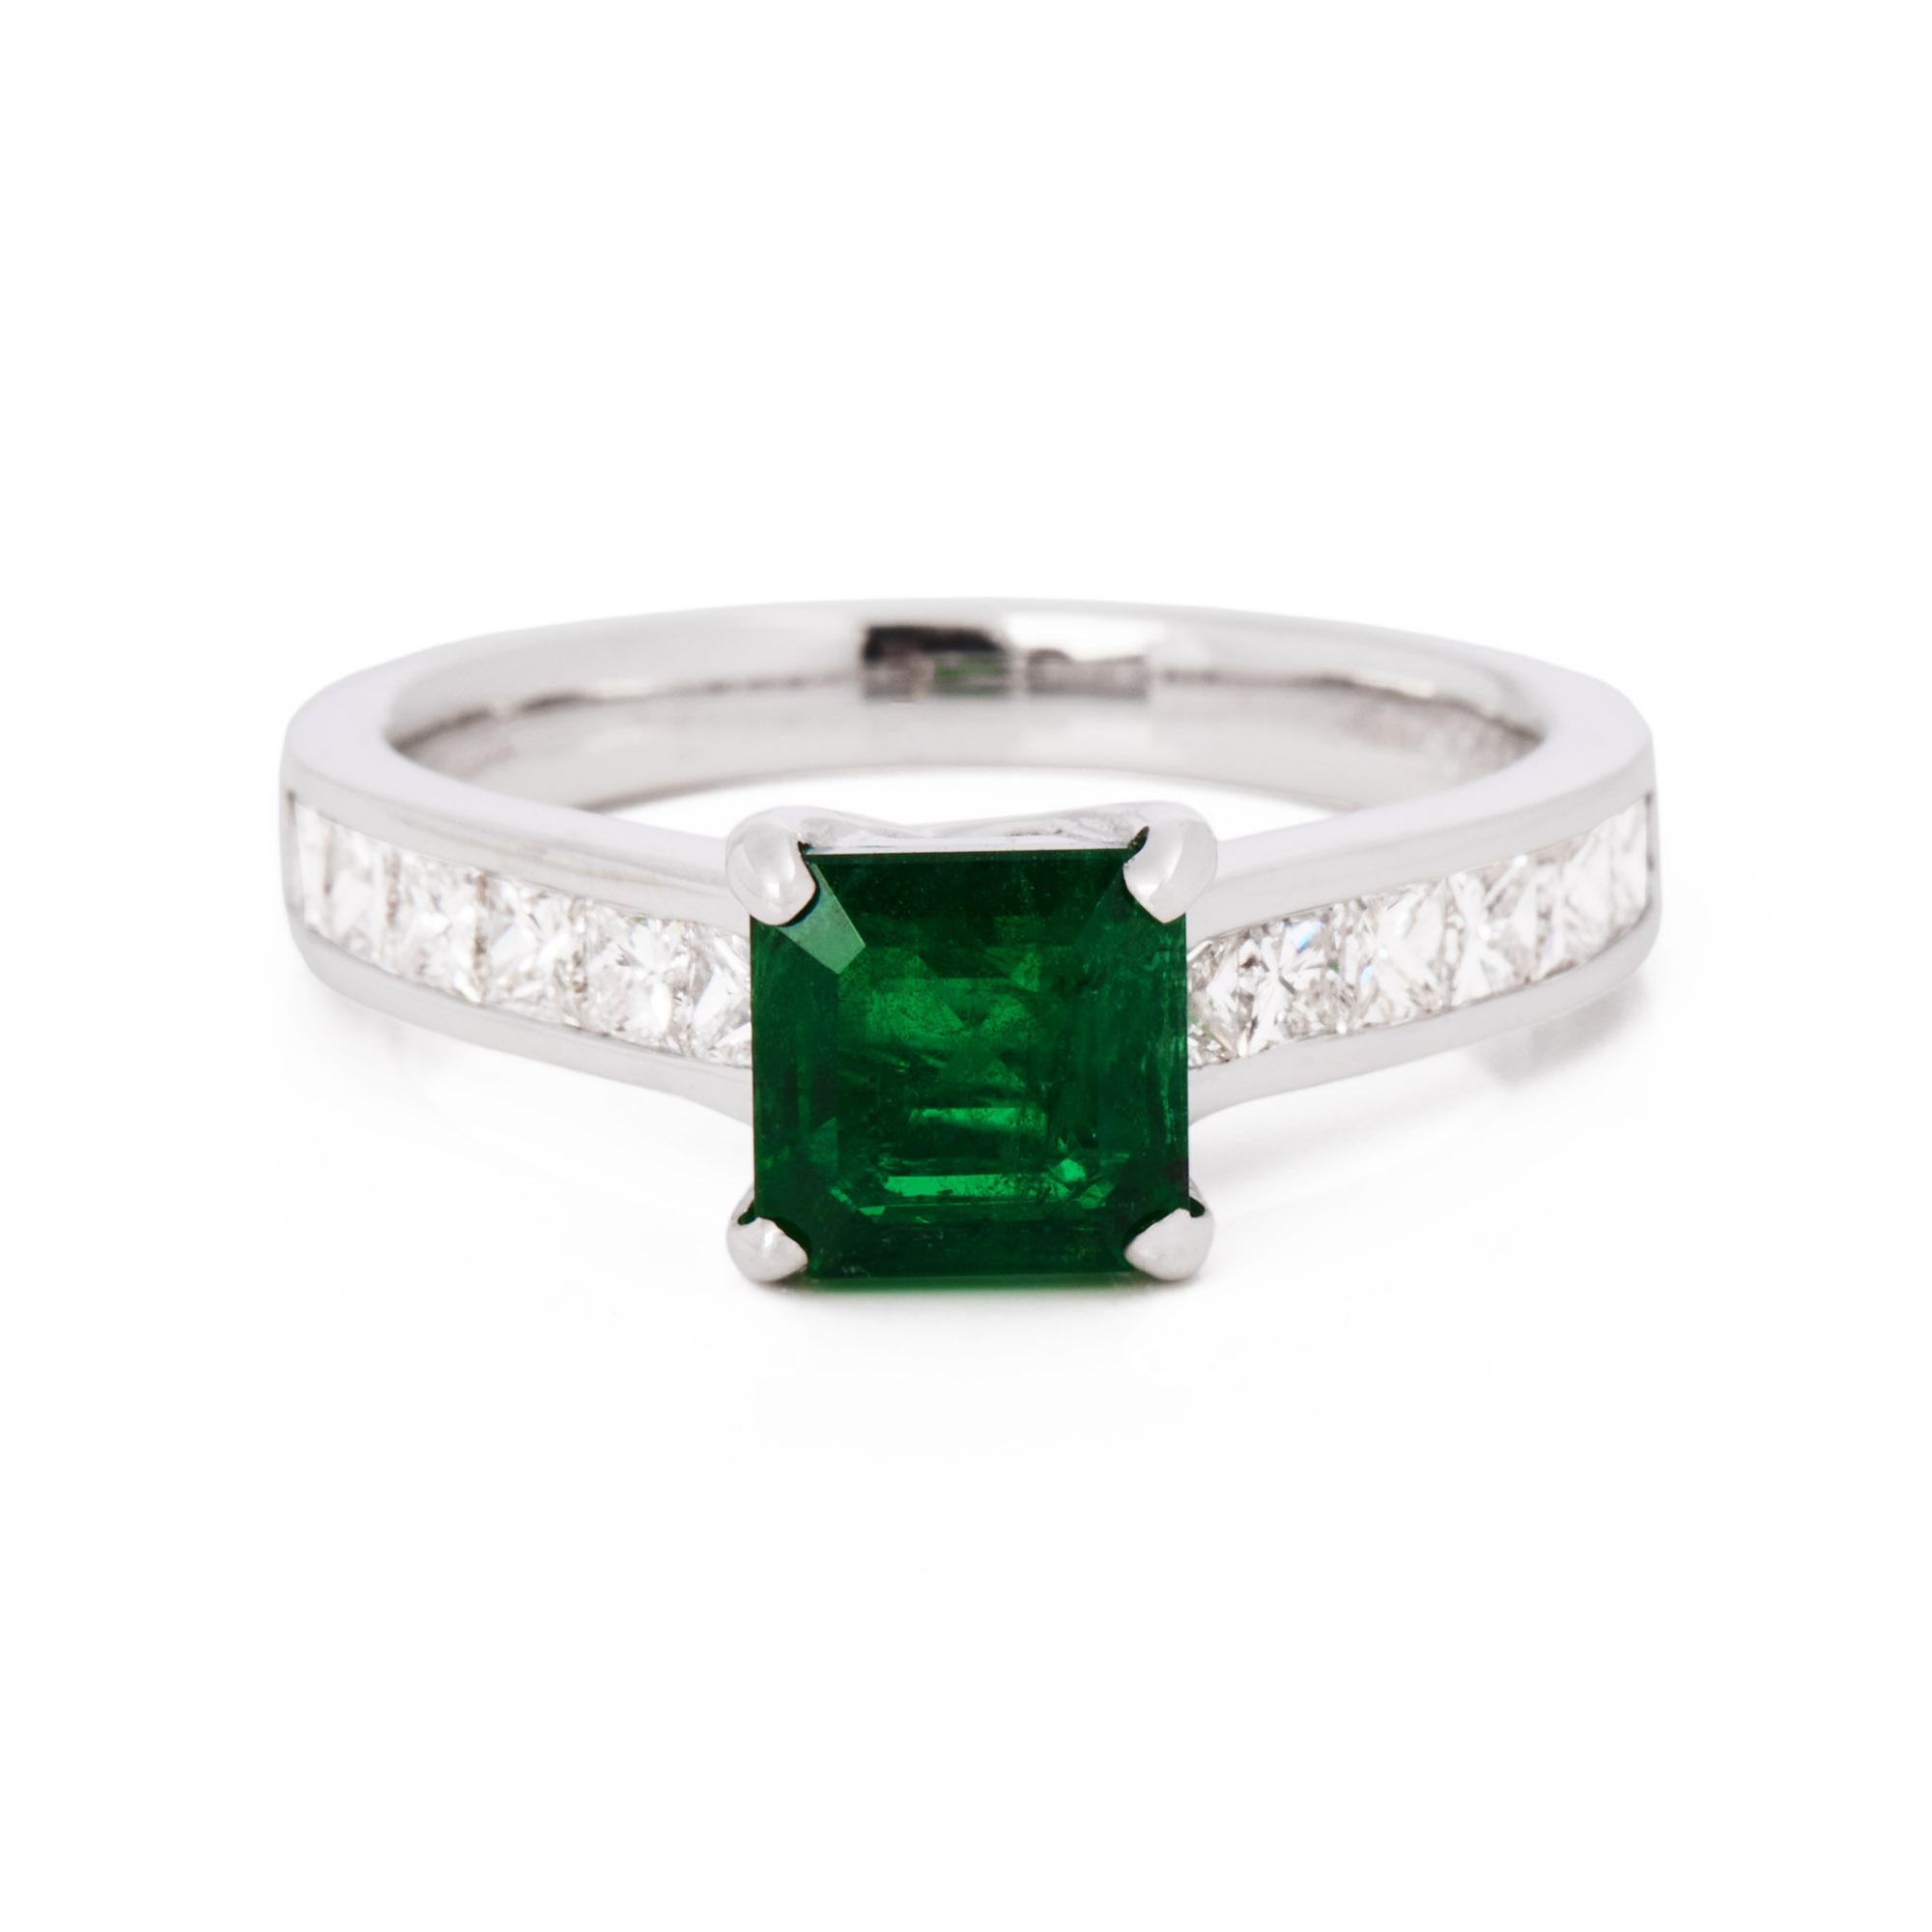 This ring is from the private collection of gemstone jewellery individually designed by David Jerome. It features a square cut untreated emerald sourced from Zambia set with diamonds. Accompanied by an IGR gem certificate. UK ring size K. EU ring